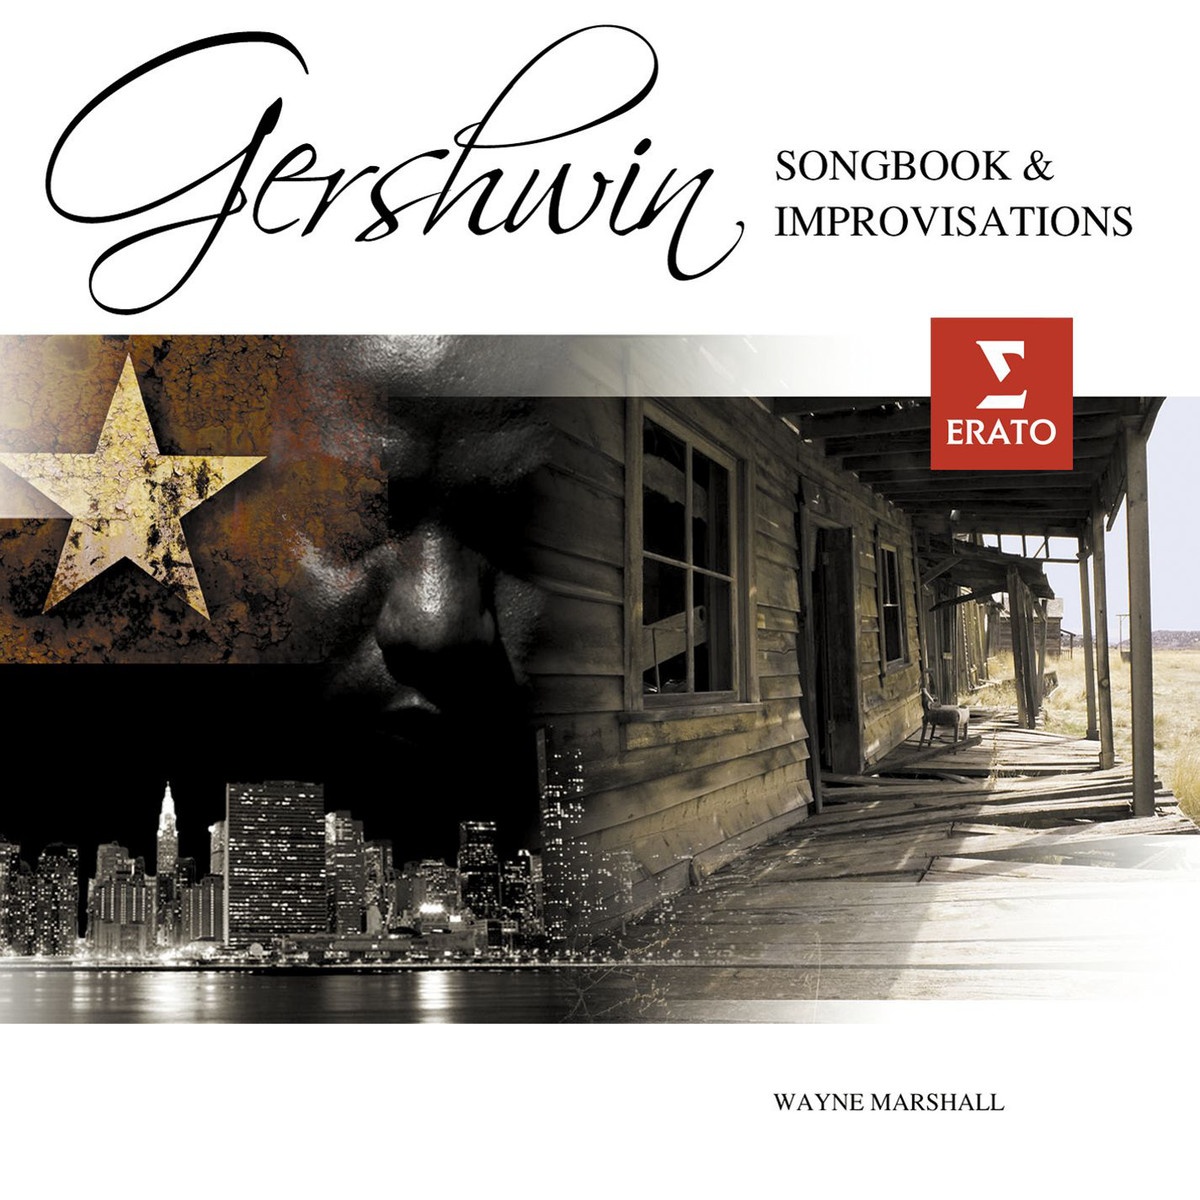 A Gershwin Songbook: improvisations on songs by George Gershwin: They can't take that away from us (Shall we dance?)